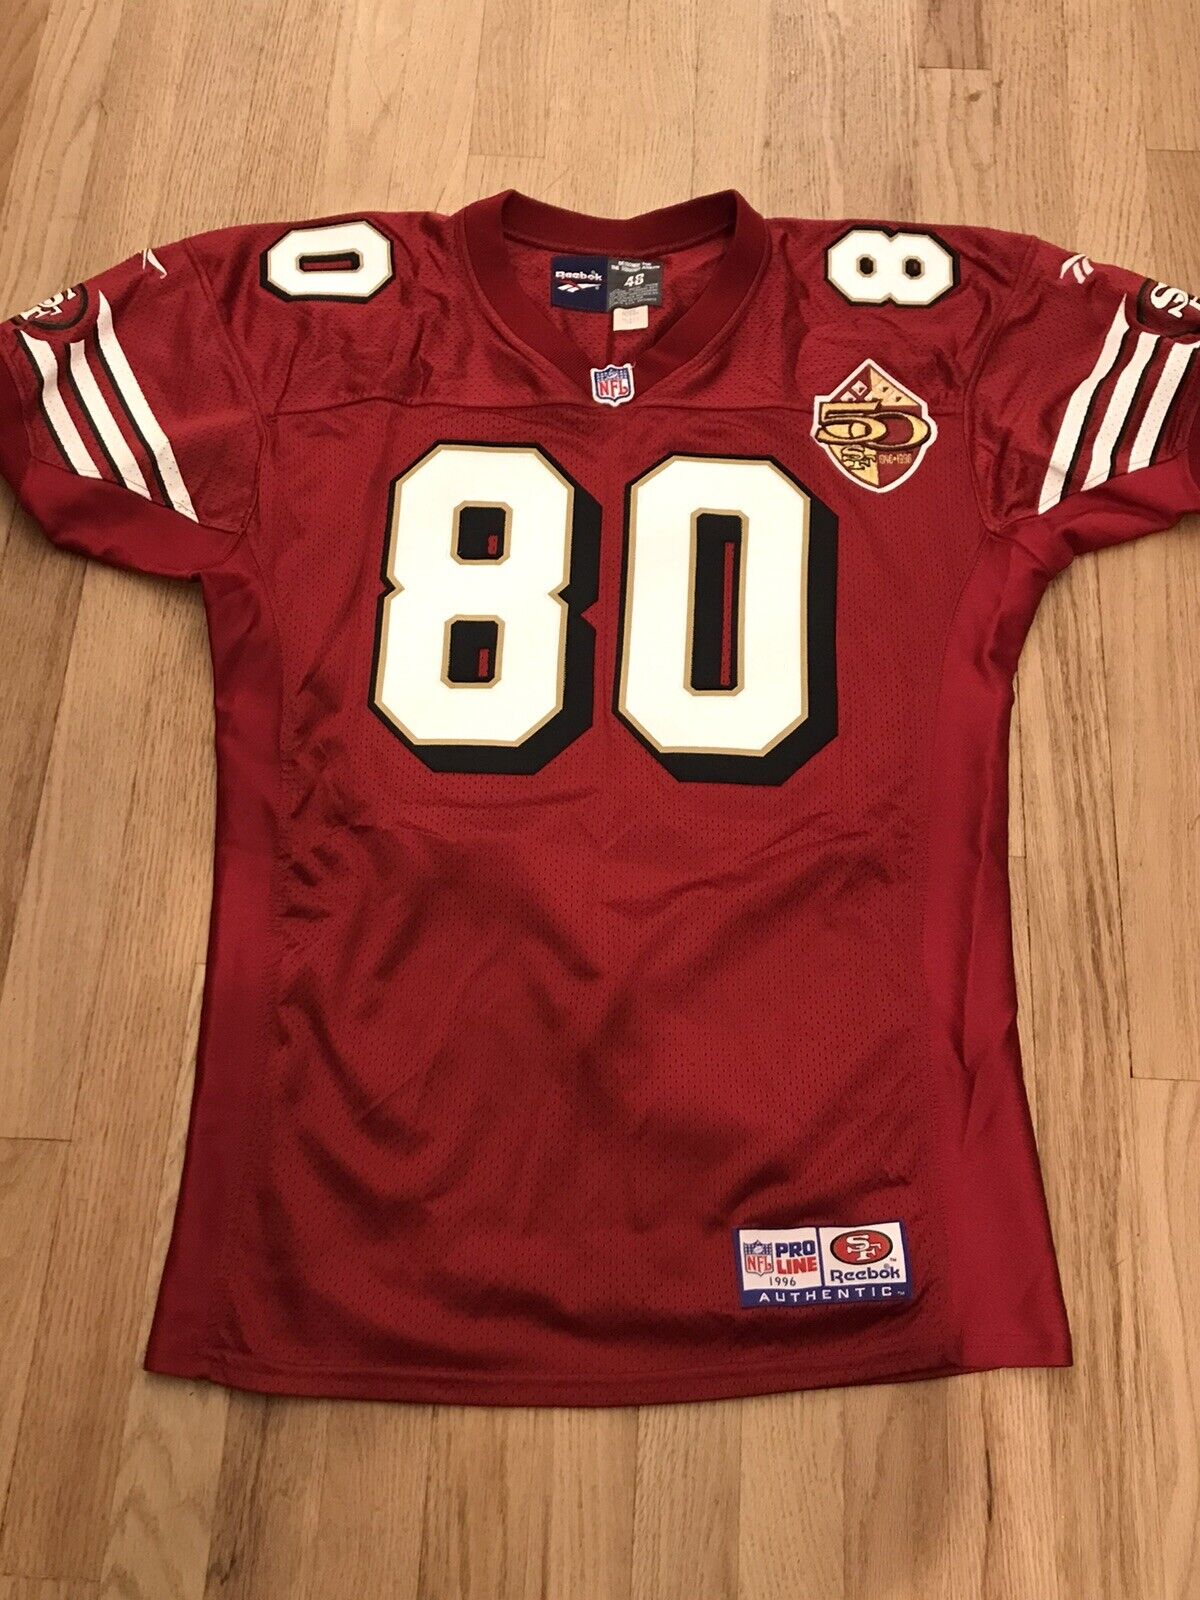 Jerry Rice Team issued San Francisco 49ers Jersey Game Used Worn